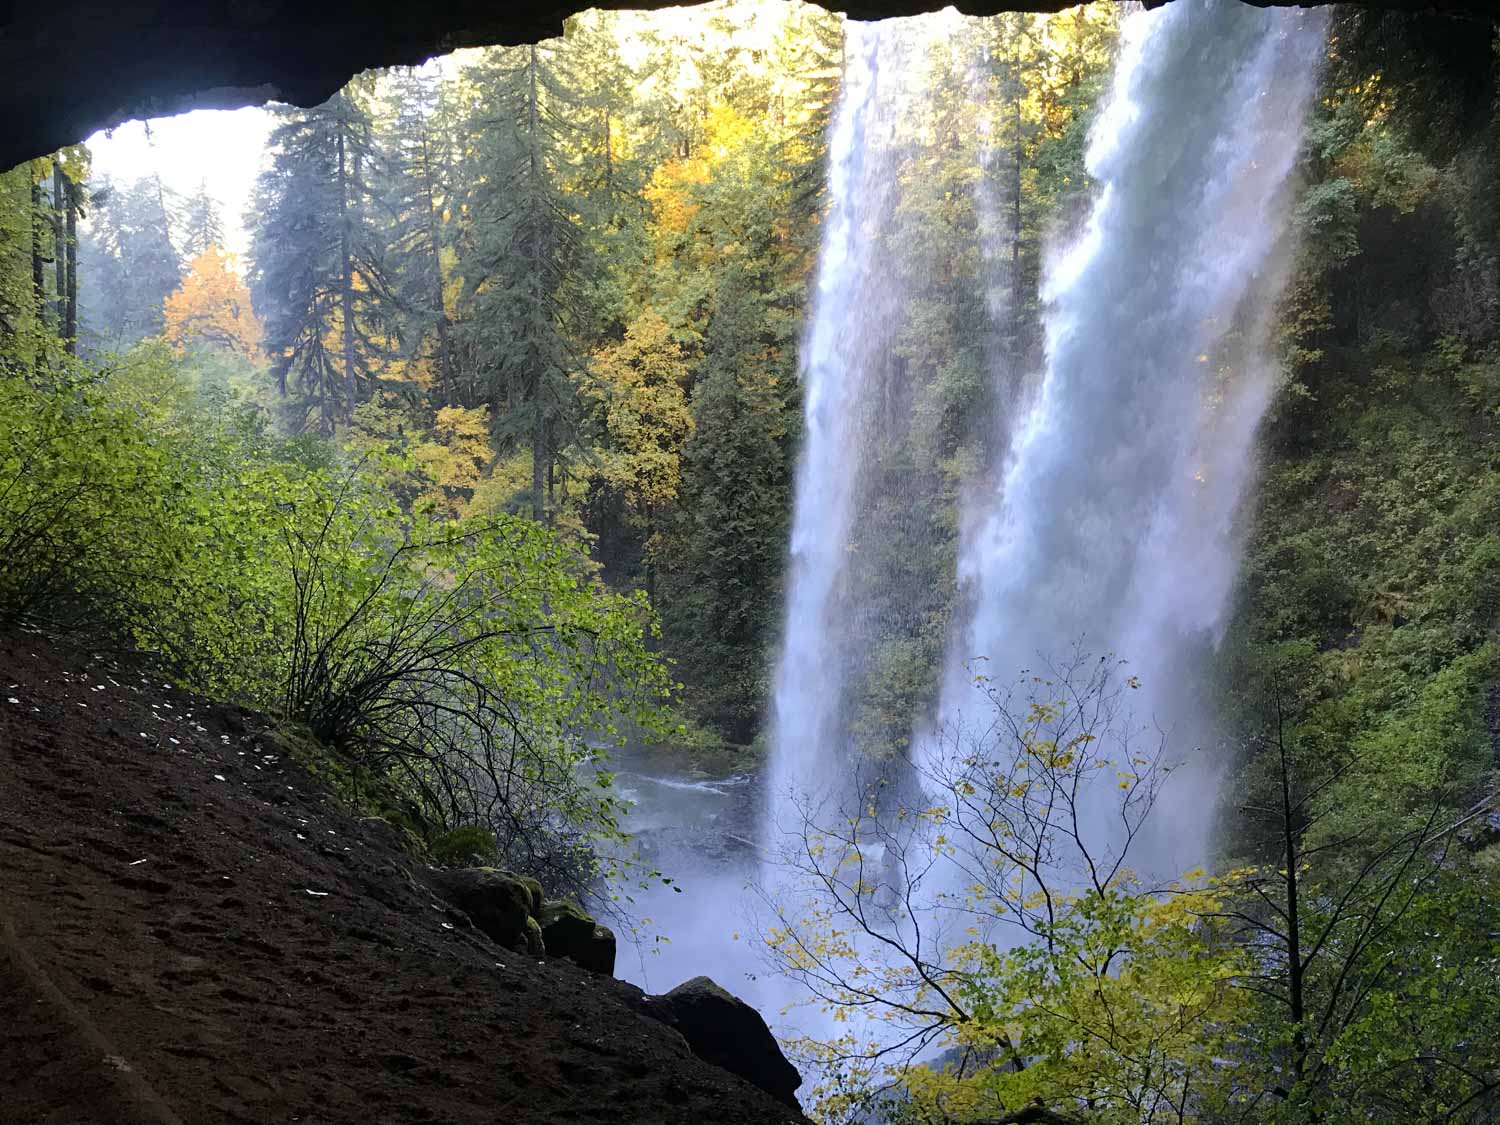 the South Falls of Silver Falls State Park, as seen from a cave behind the falls